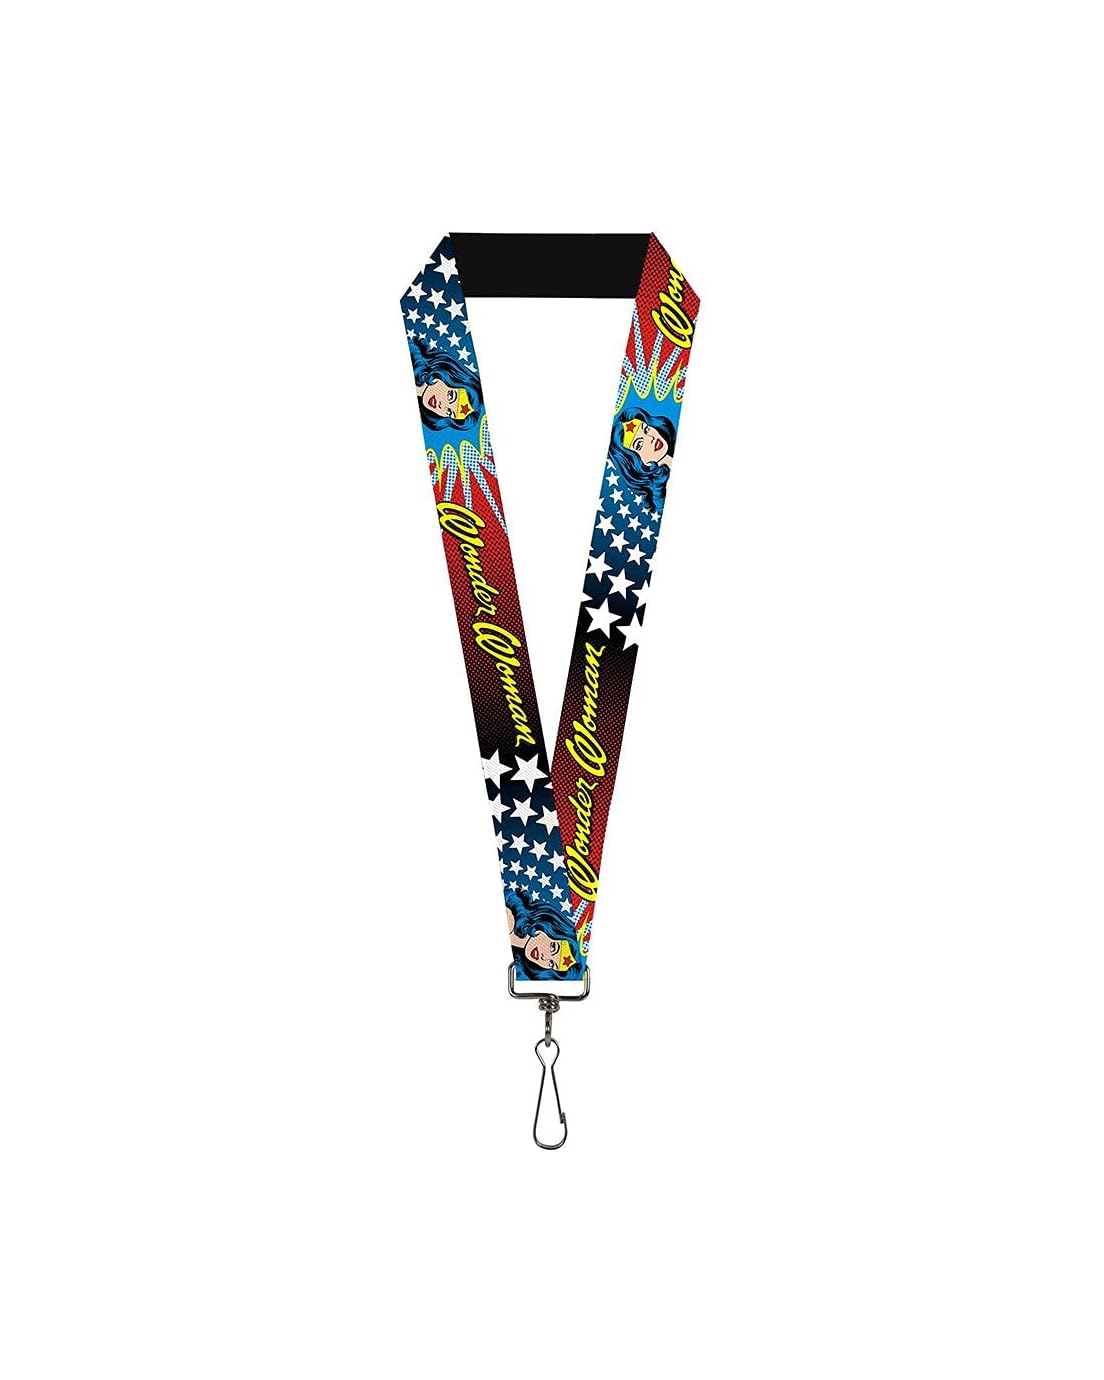 Buckle-Down Unisex-Adults Lanyard-10-Wonder Woman Face W/Stars, Multicolor, One-Size